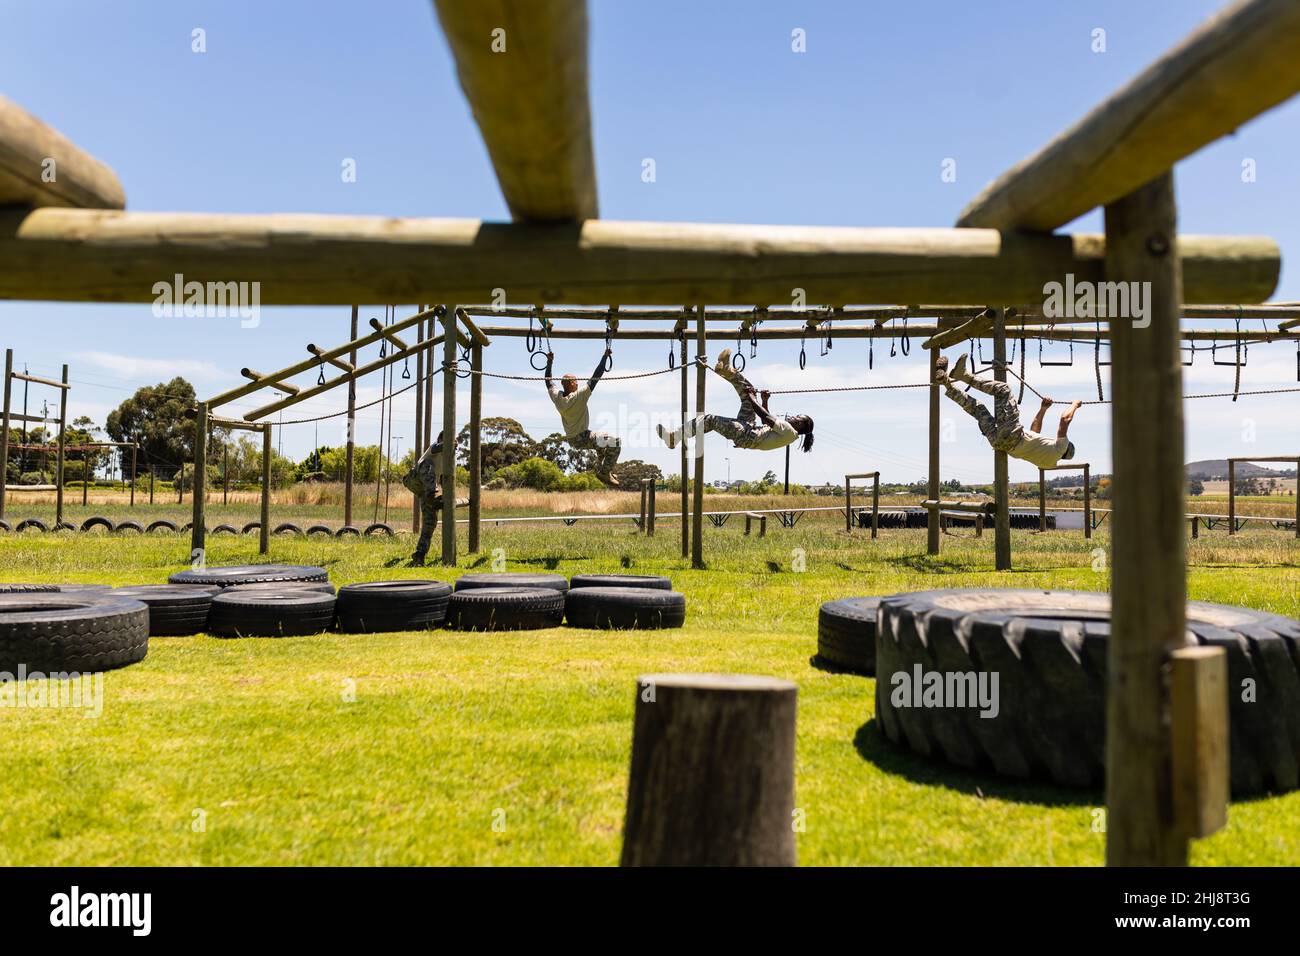 Group of male and female diverse soldiers rope climbing during obstacle course at boot camp Stock Photo